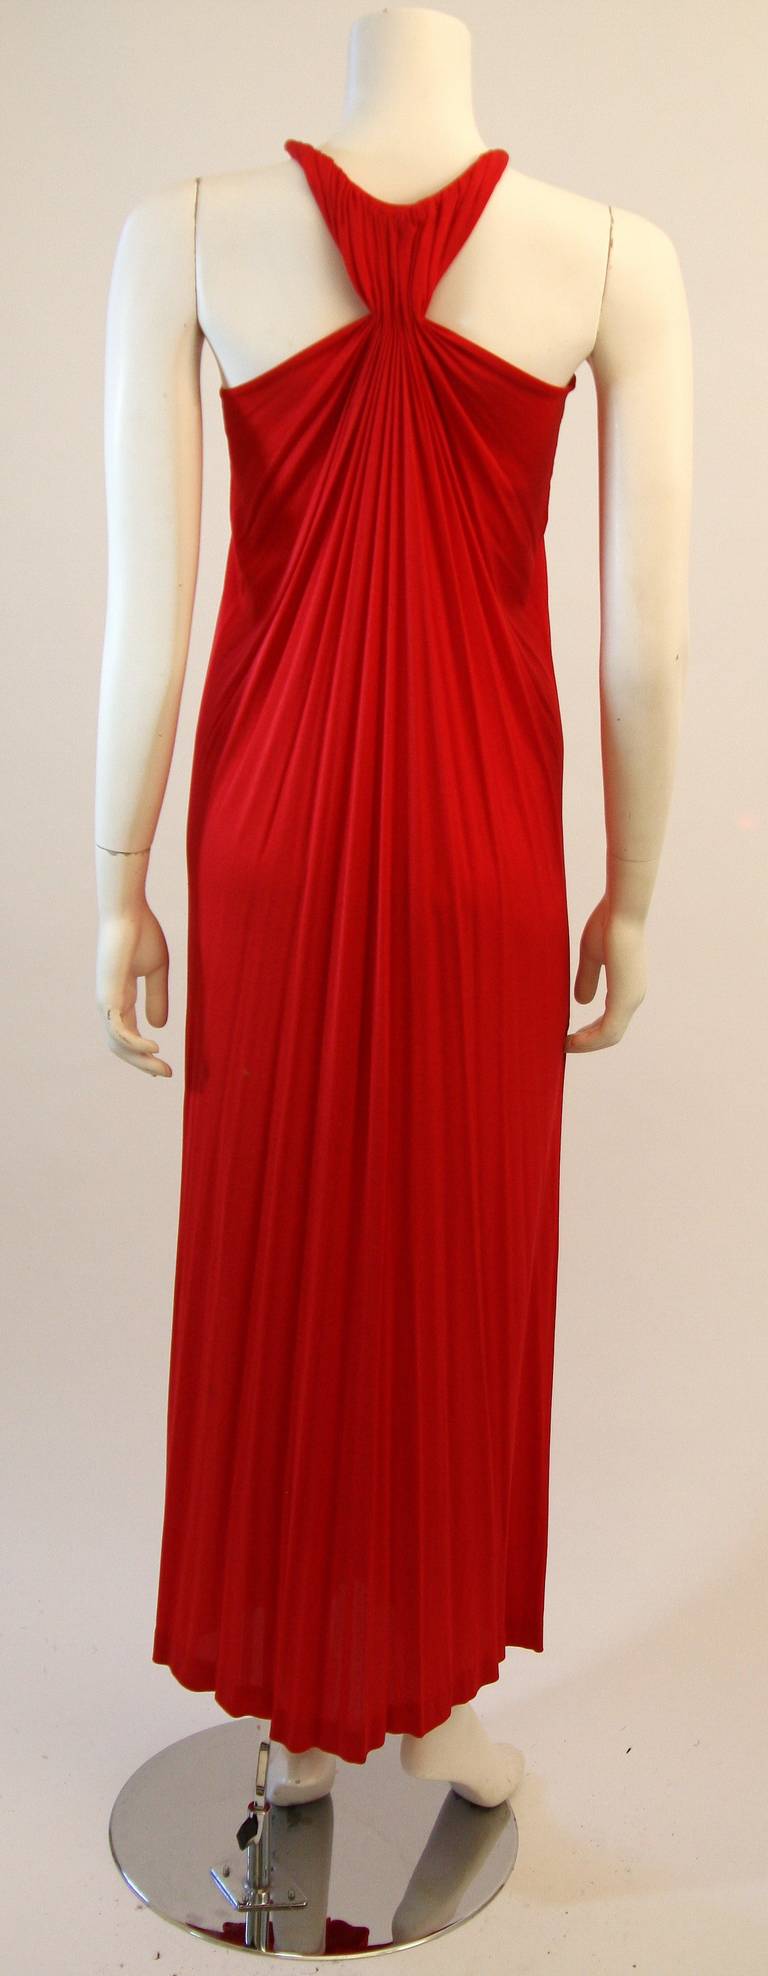 Gorgeous Red Jersey Dress with Gathers and Racer Style Halter For Sale 2